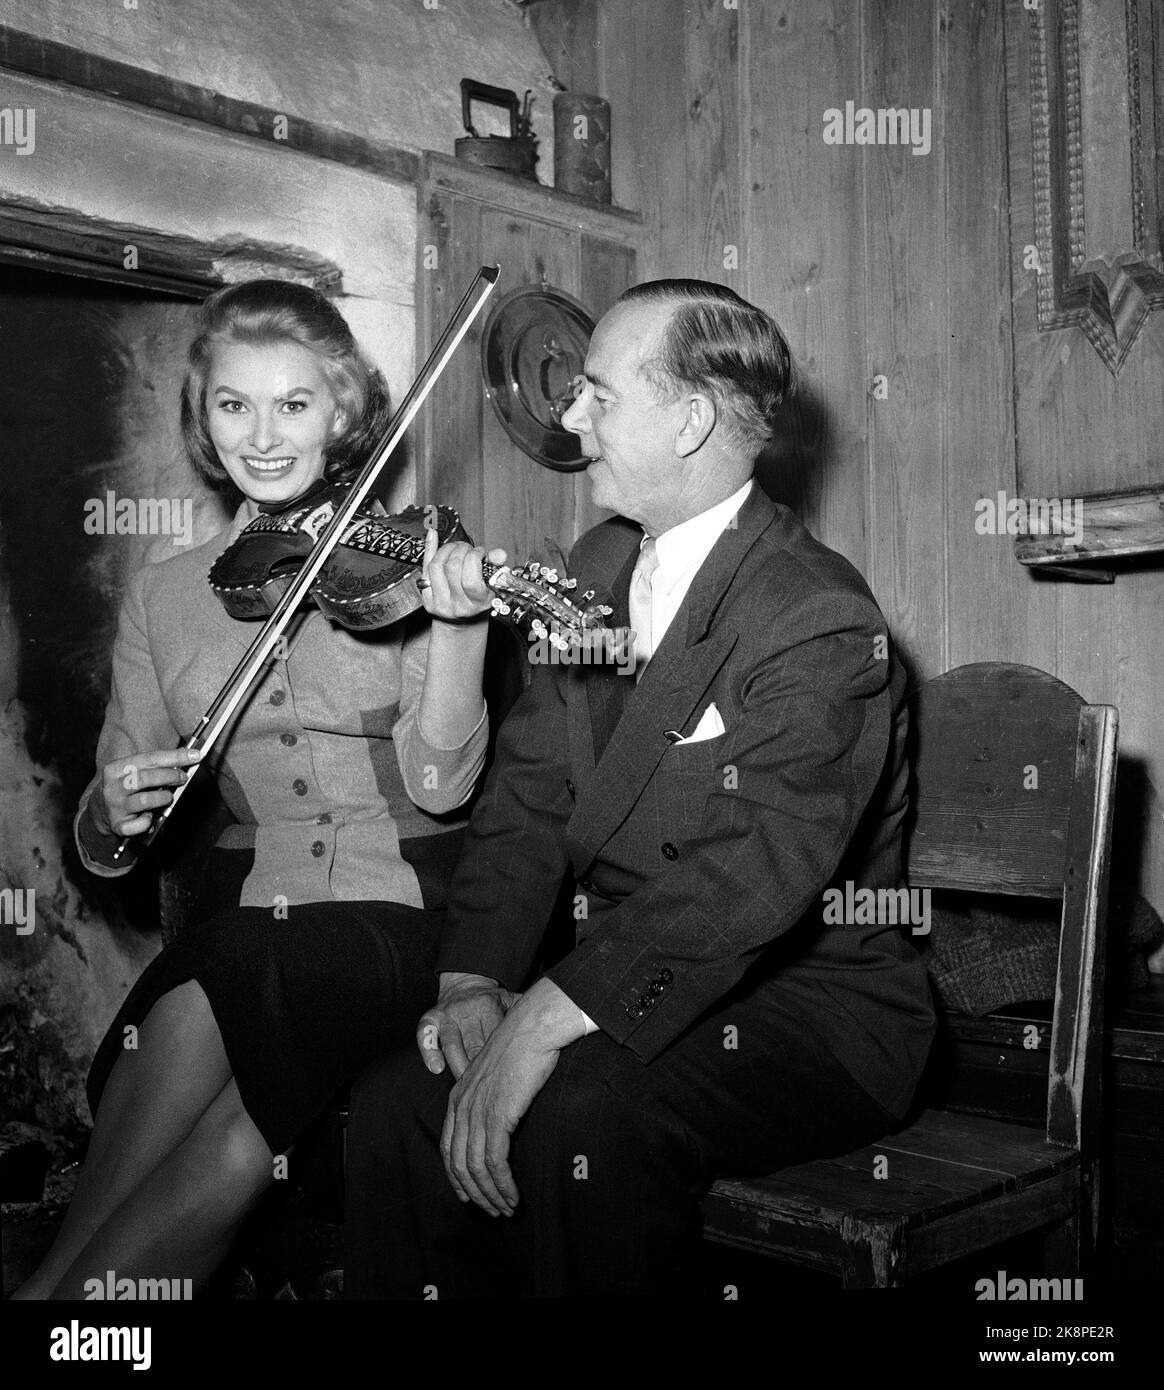 Oslo.19551208. Film actor Sophia Loren visits Norway. Here with actor Alfred Maurstad, who played harding fiddle for the diva at the Folk Museum. Afterwards, Sophia got a try, and the famous smile was loose! Photo NTB / NTB Stock Photo